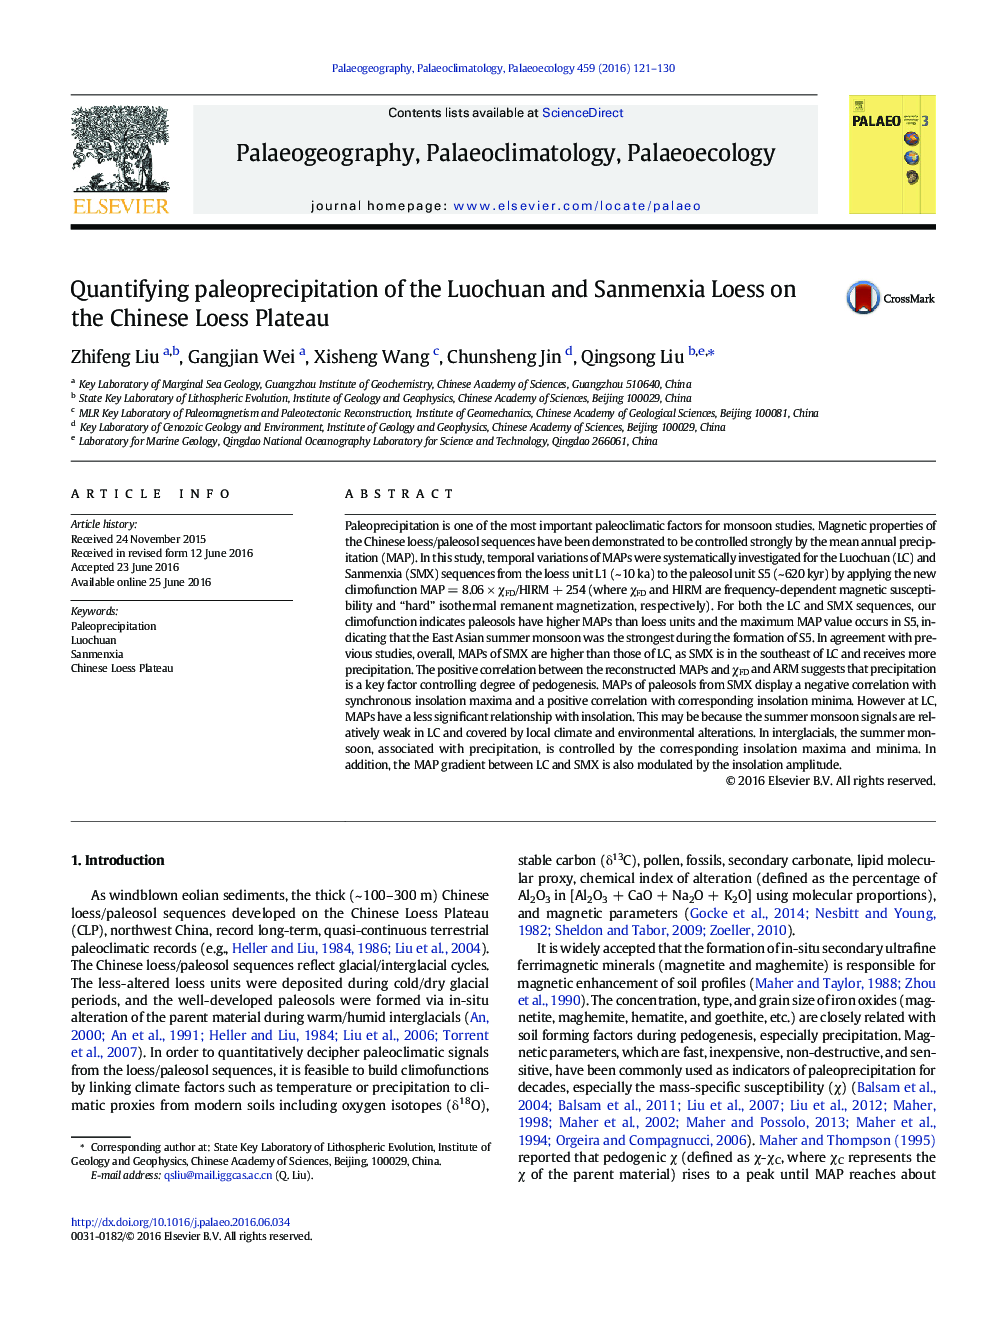 Quantifying paleoprecipitation of the Luochuan and Sanmenxia Loess on the Chinese Loess Plateau